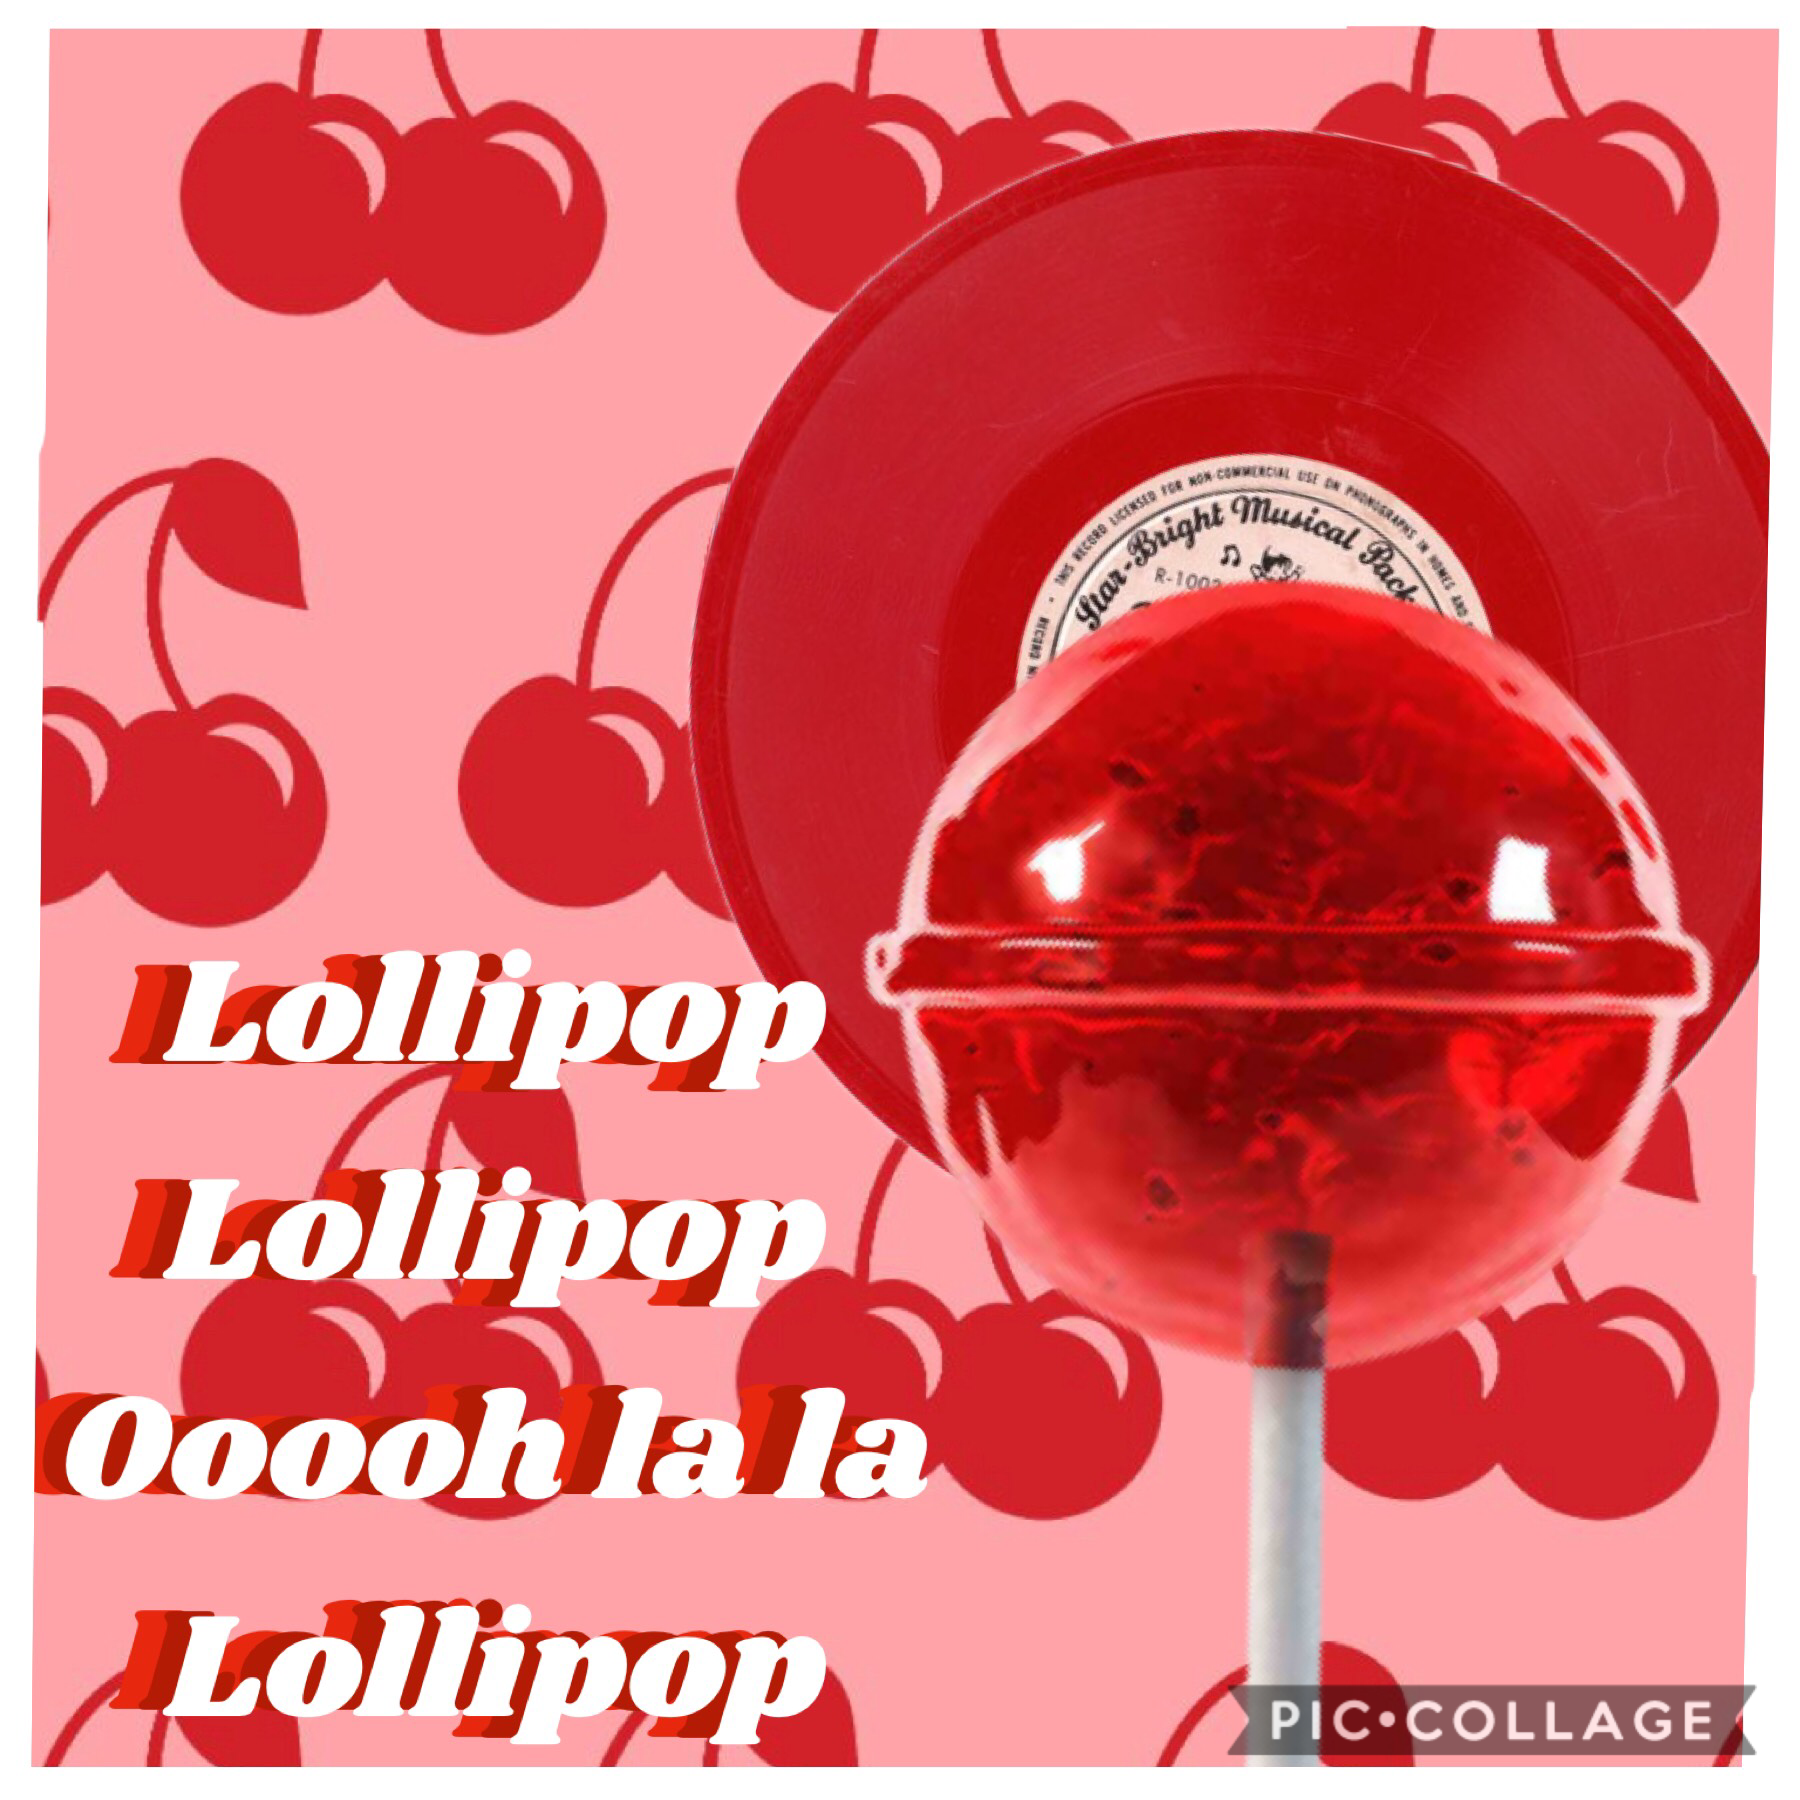 🍒 𝕋𝕒𝕡 🍒
I gave this a really red vibe. But anyway 🤷🏻‍♀️ I hope you like it! Comment your ℱ𝒶𝓋ℴ𝓇𝒾𝓉ℯ color!